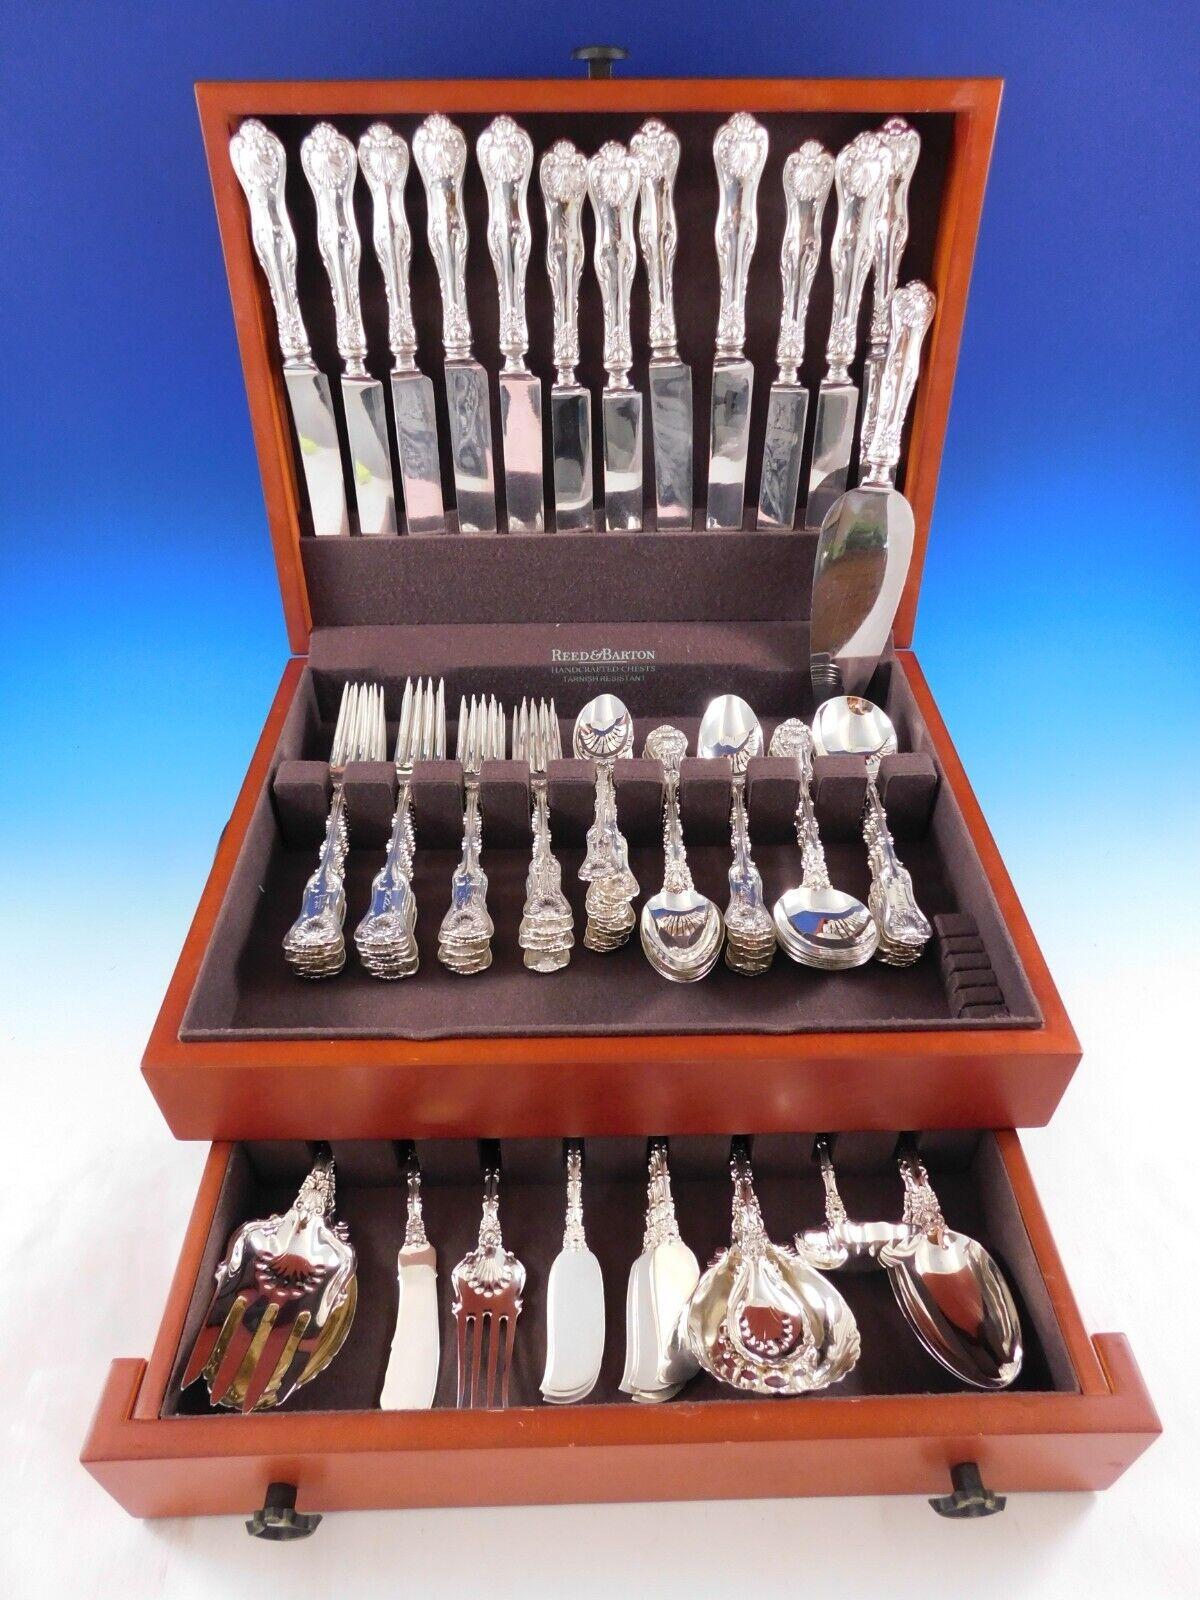 Monumental Dinner Size Imperial Queen by Whiting Sterling Silver Flatware set with classic shell motif - 94 pieces. This set includes:

12 Banquet Size Knives, 10 5/8